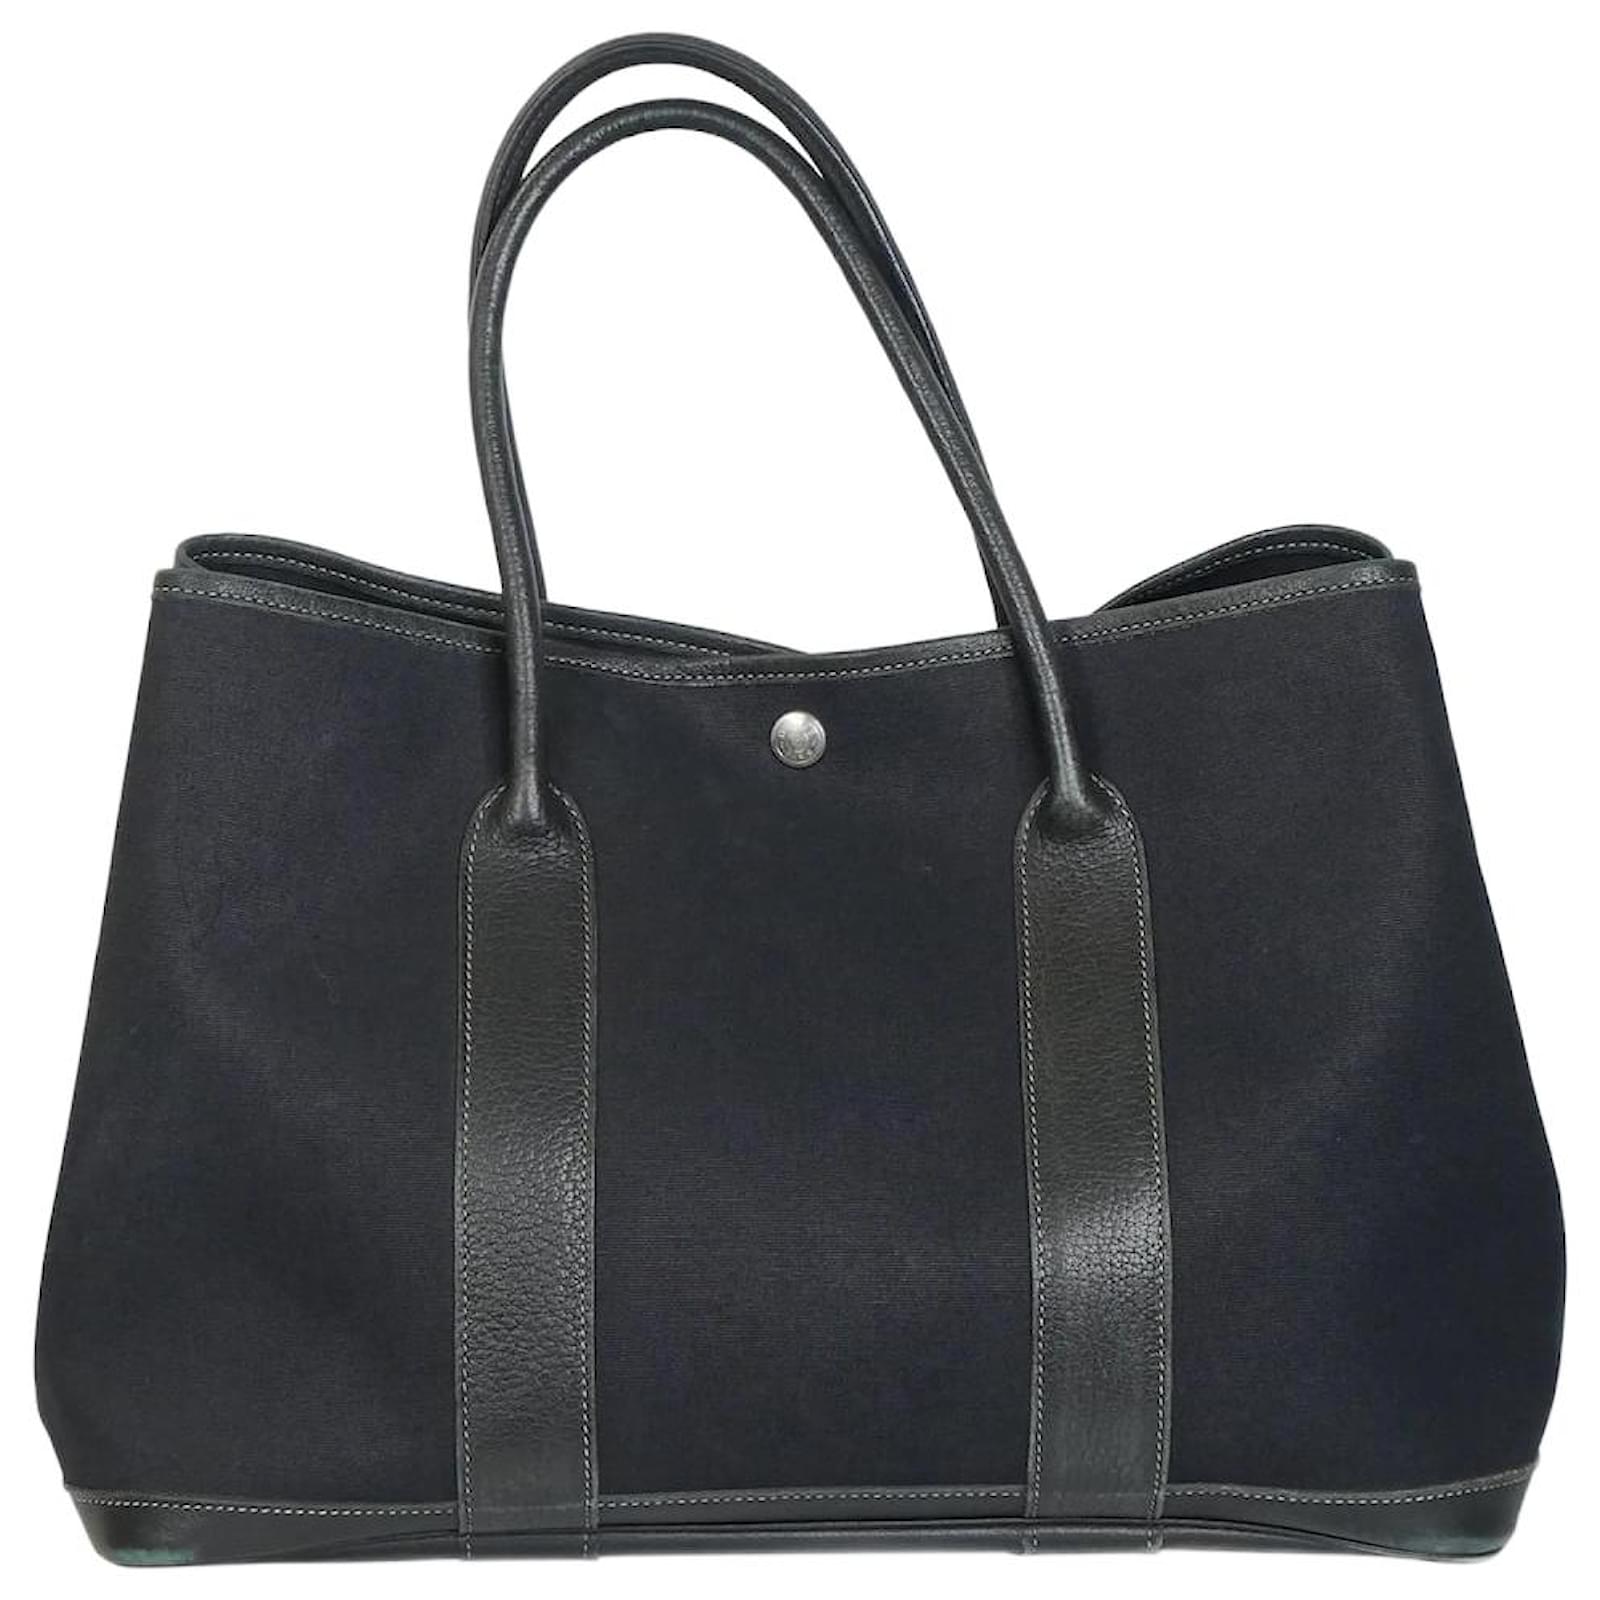 Hermes Hermes Garden Party MM Black Leather Gray Canvas Tote